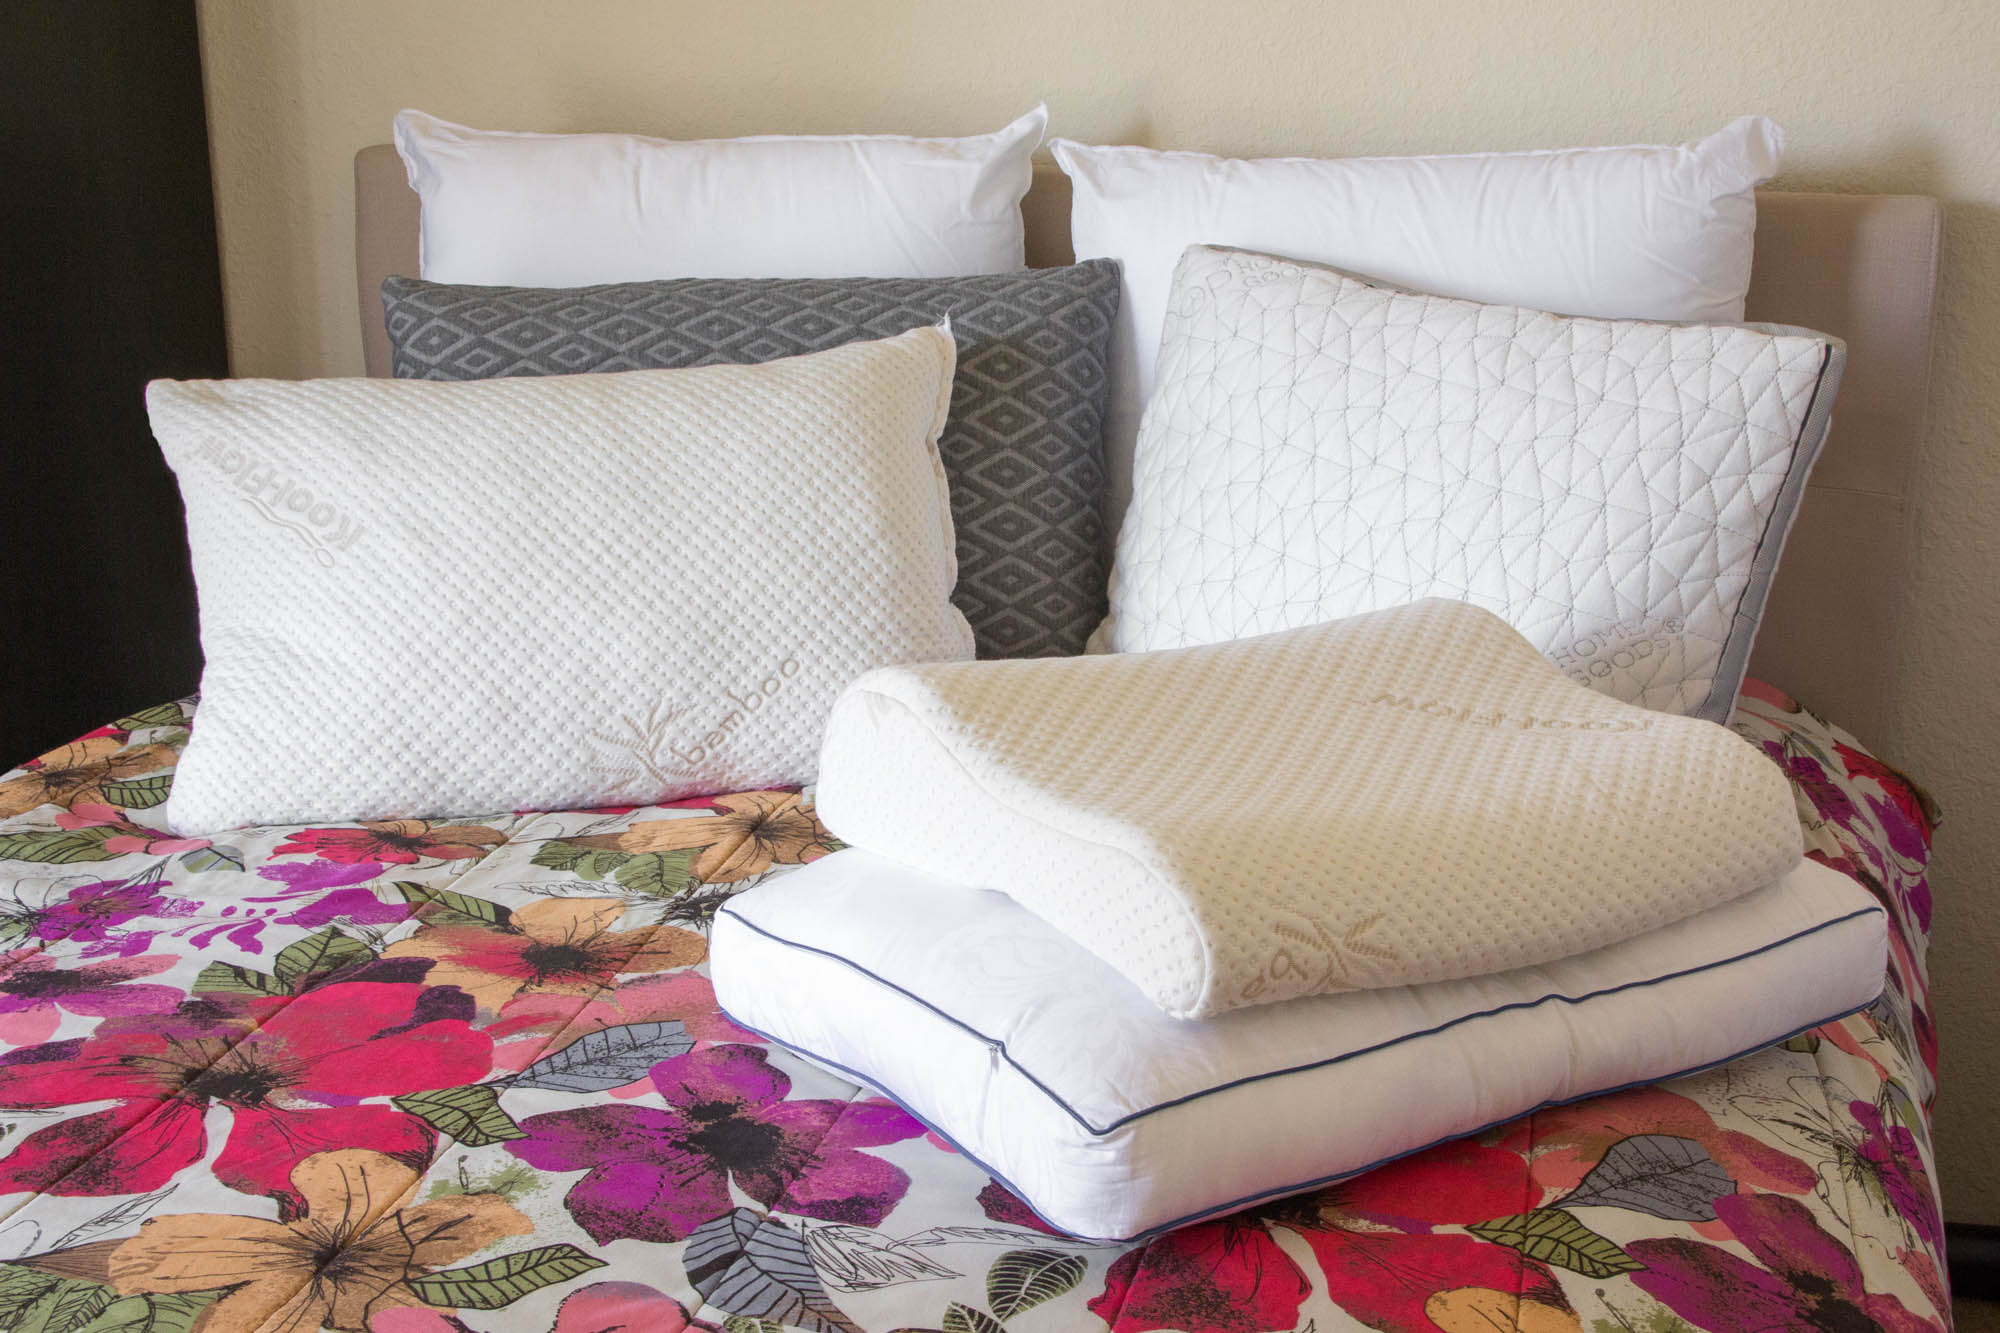 Best Pillows For Neck Pain - Our Top 6 Pillow Picks 